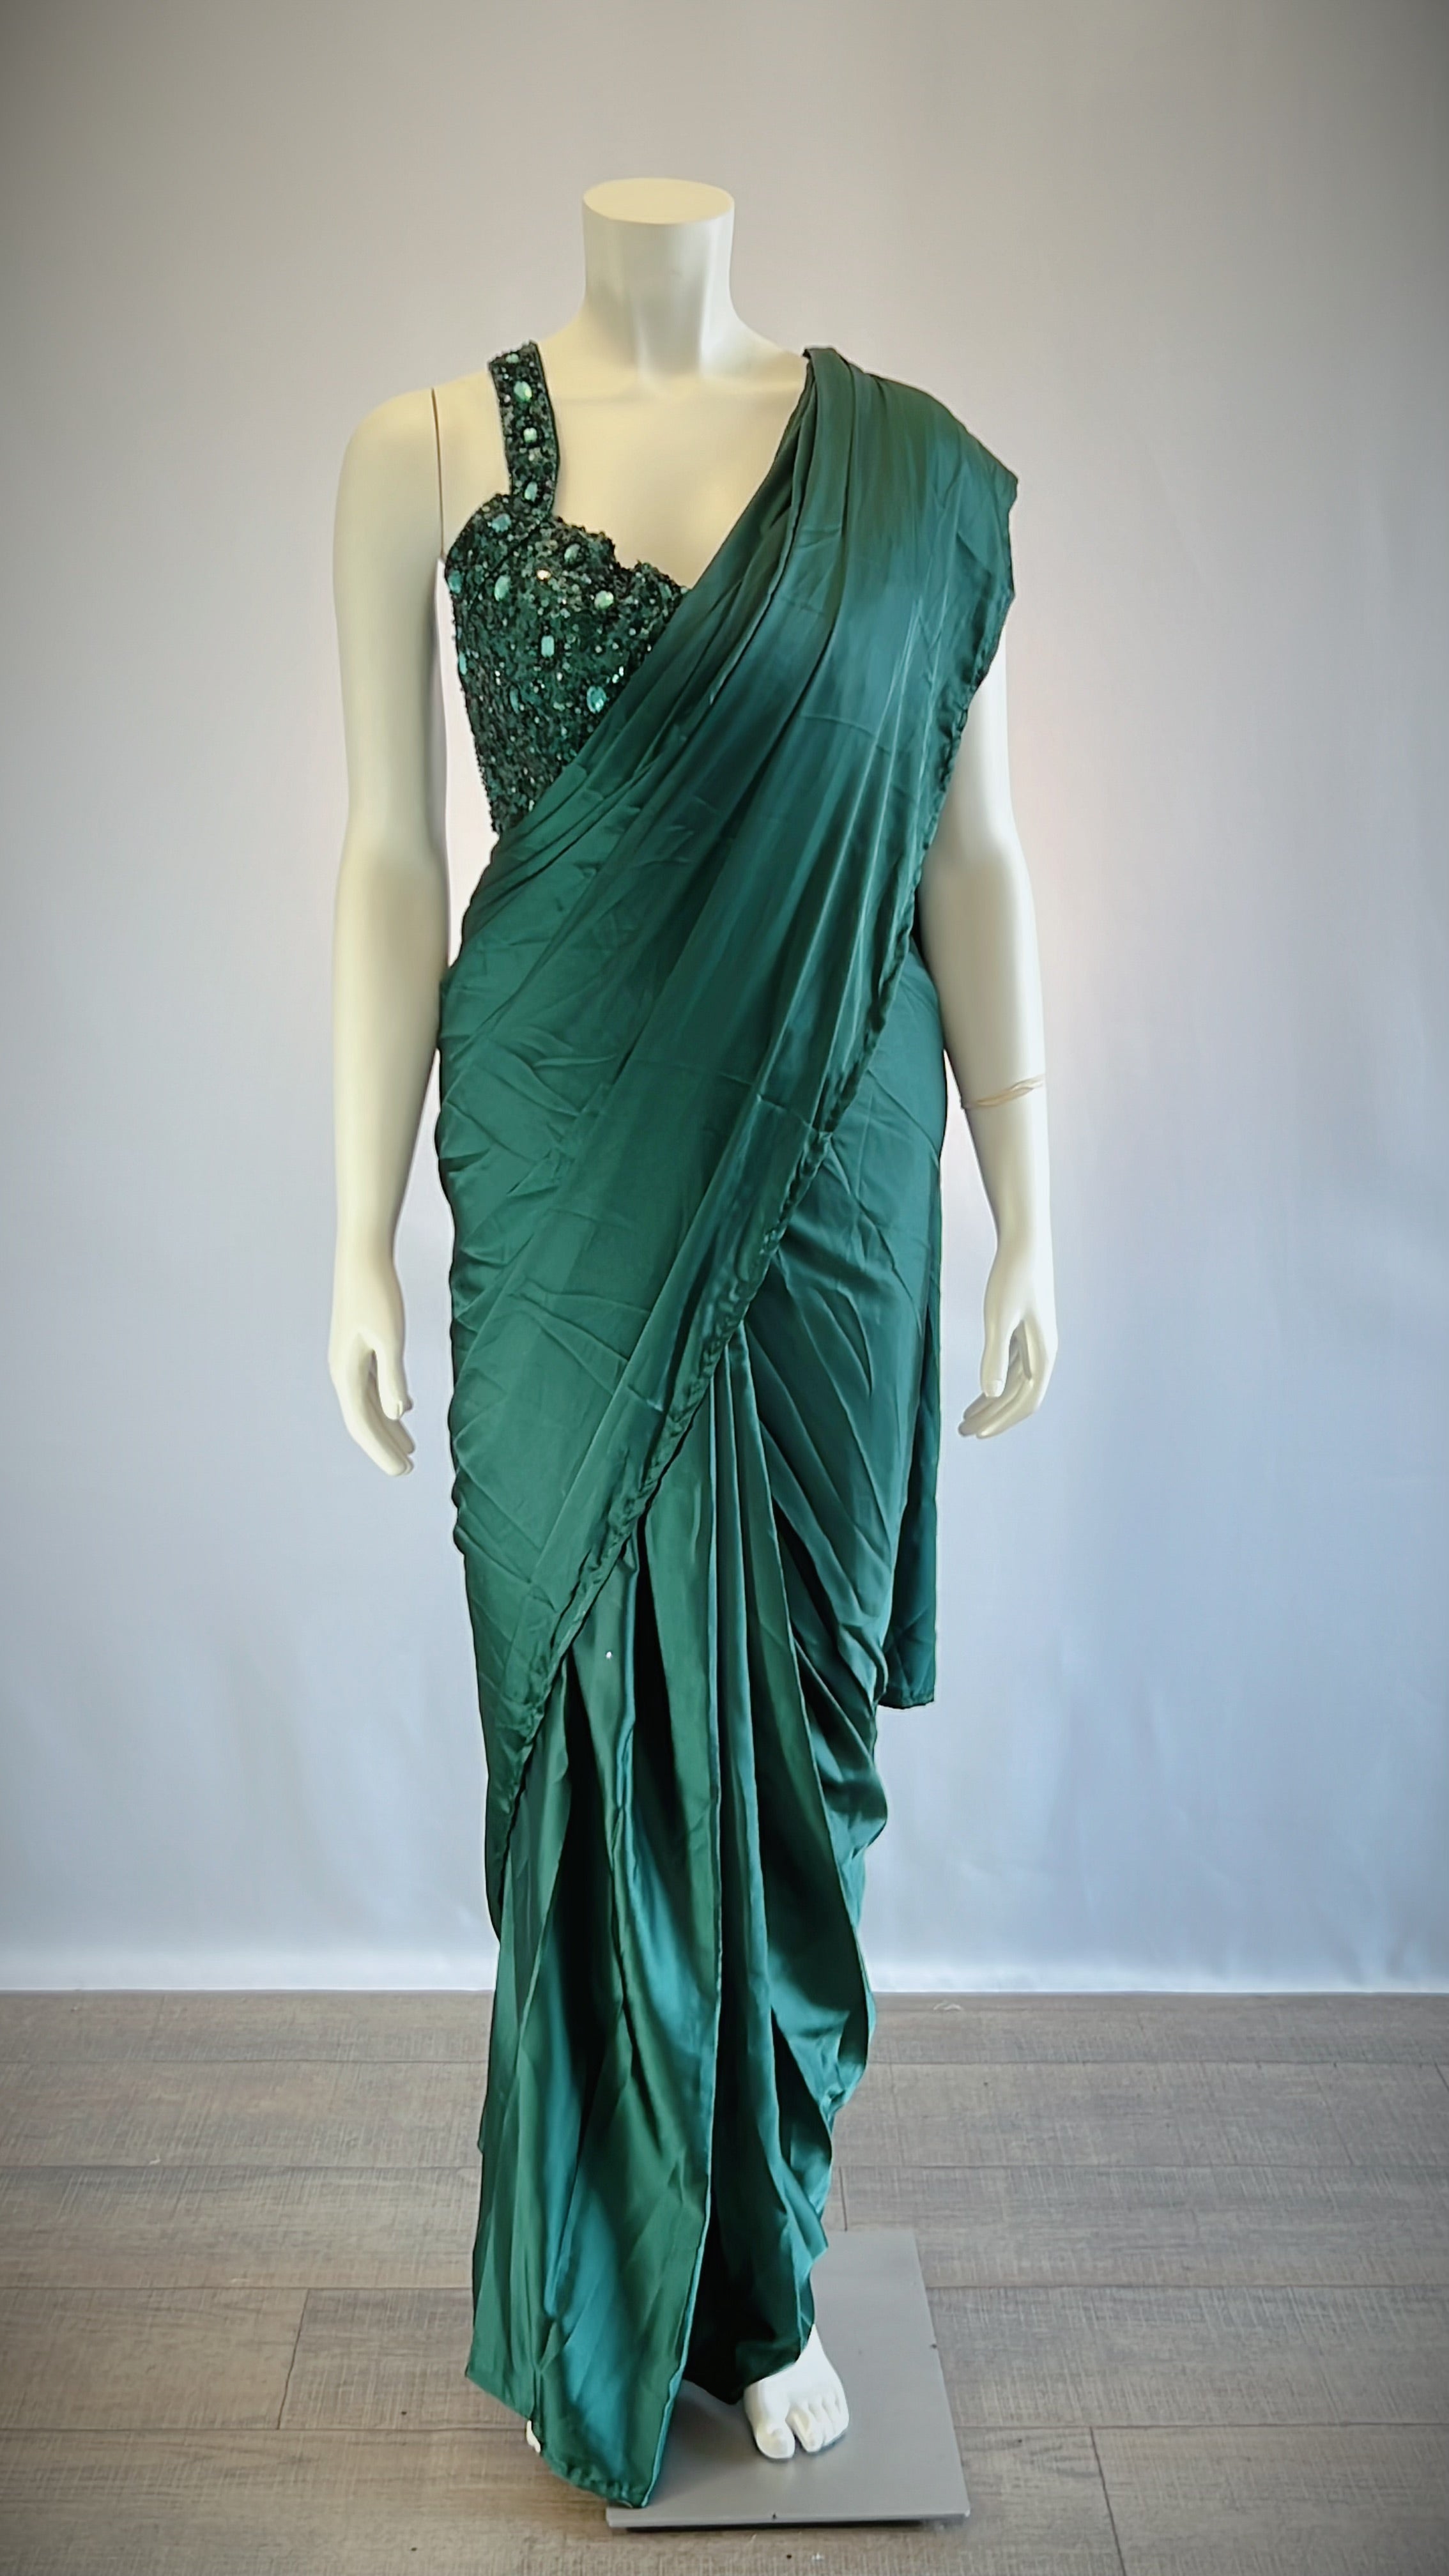 Teal Satin Silk Pre-Draped Saree with Designer Blouse - Elegant and Stylish | Shop Now for Exquisite Fashion